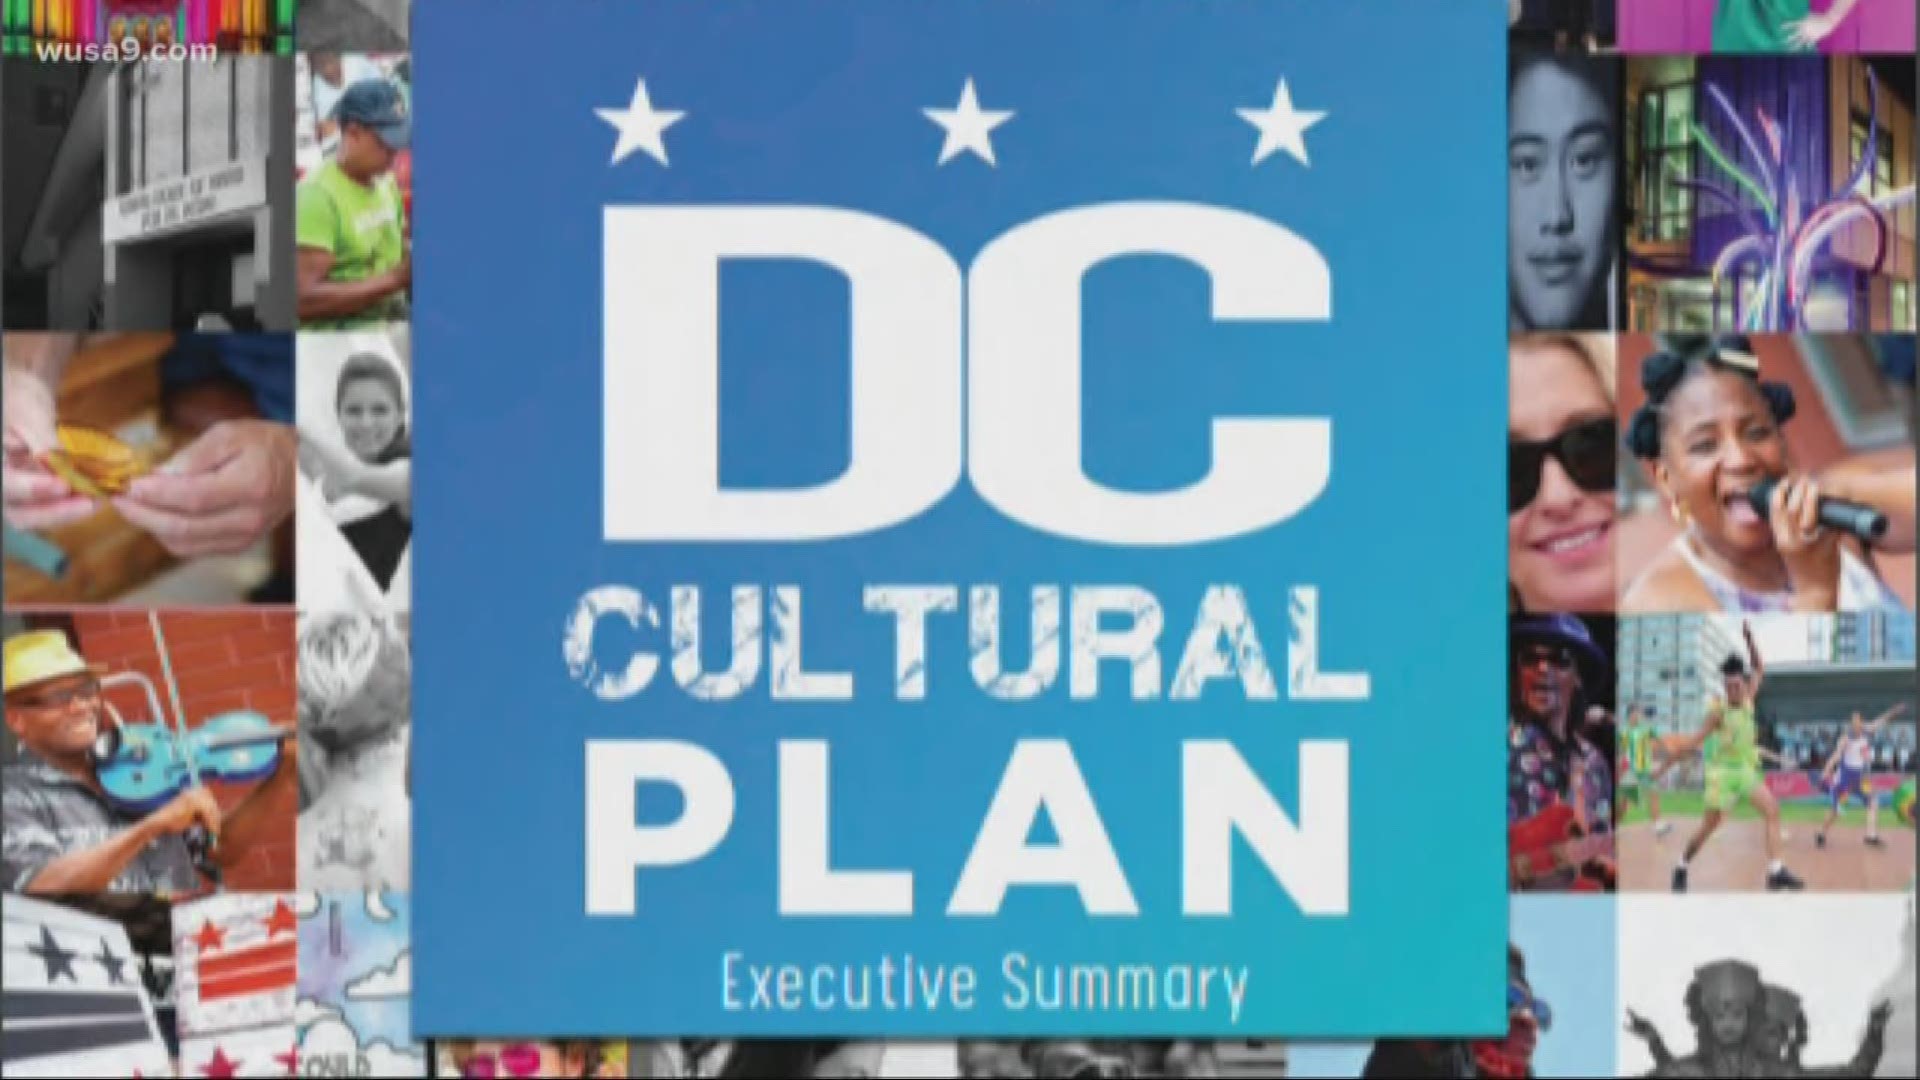 It's DC art advocacy week with artists meeting with council members throughout the week to voice their concerns about the DC art scene. This comes just days after the city unveiled its 'Cultural Plan.'